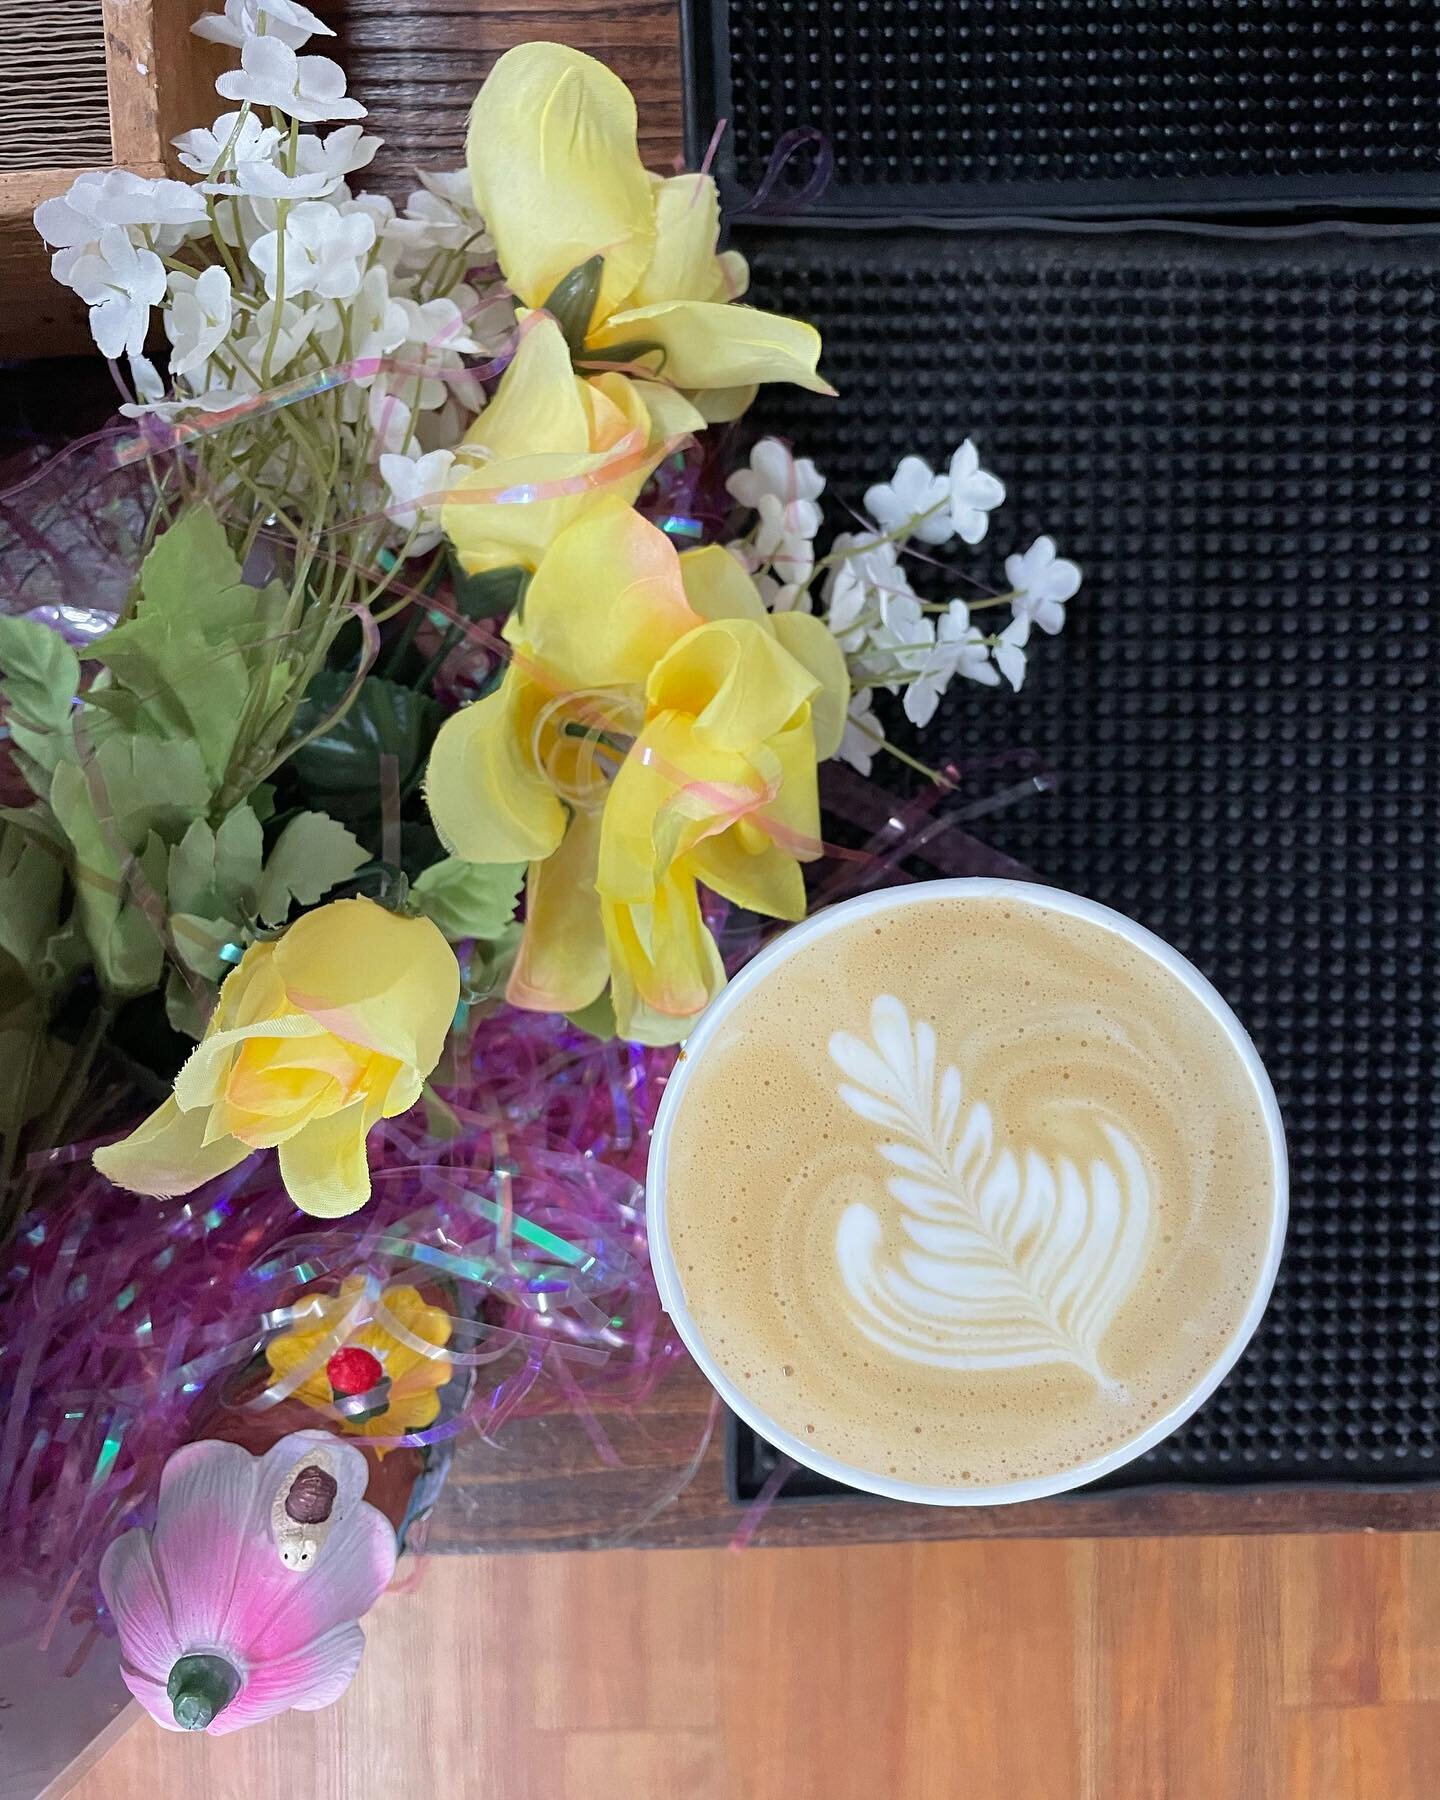 We&rsquo;ve been having fun with latte art over here 🤭

Stay creative through out the day with us 😋🖼️

#staycreative #getartsy #whatsbrewingsatx #latteart #differentlatteart